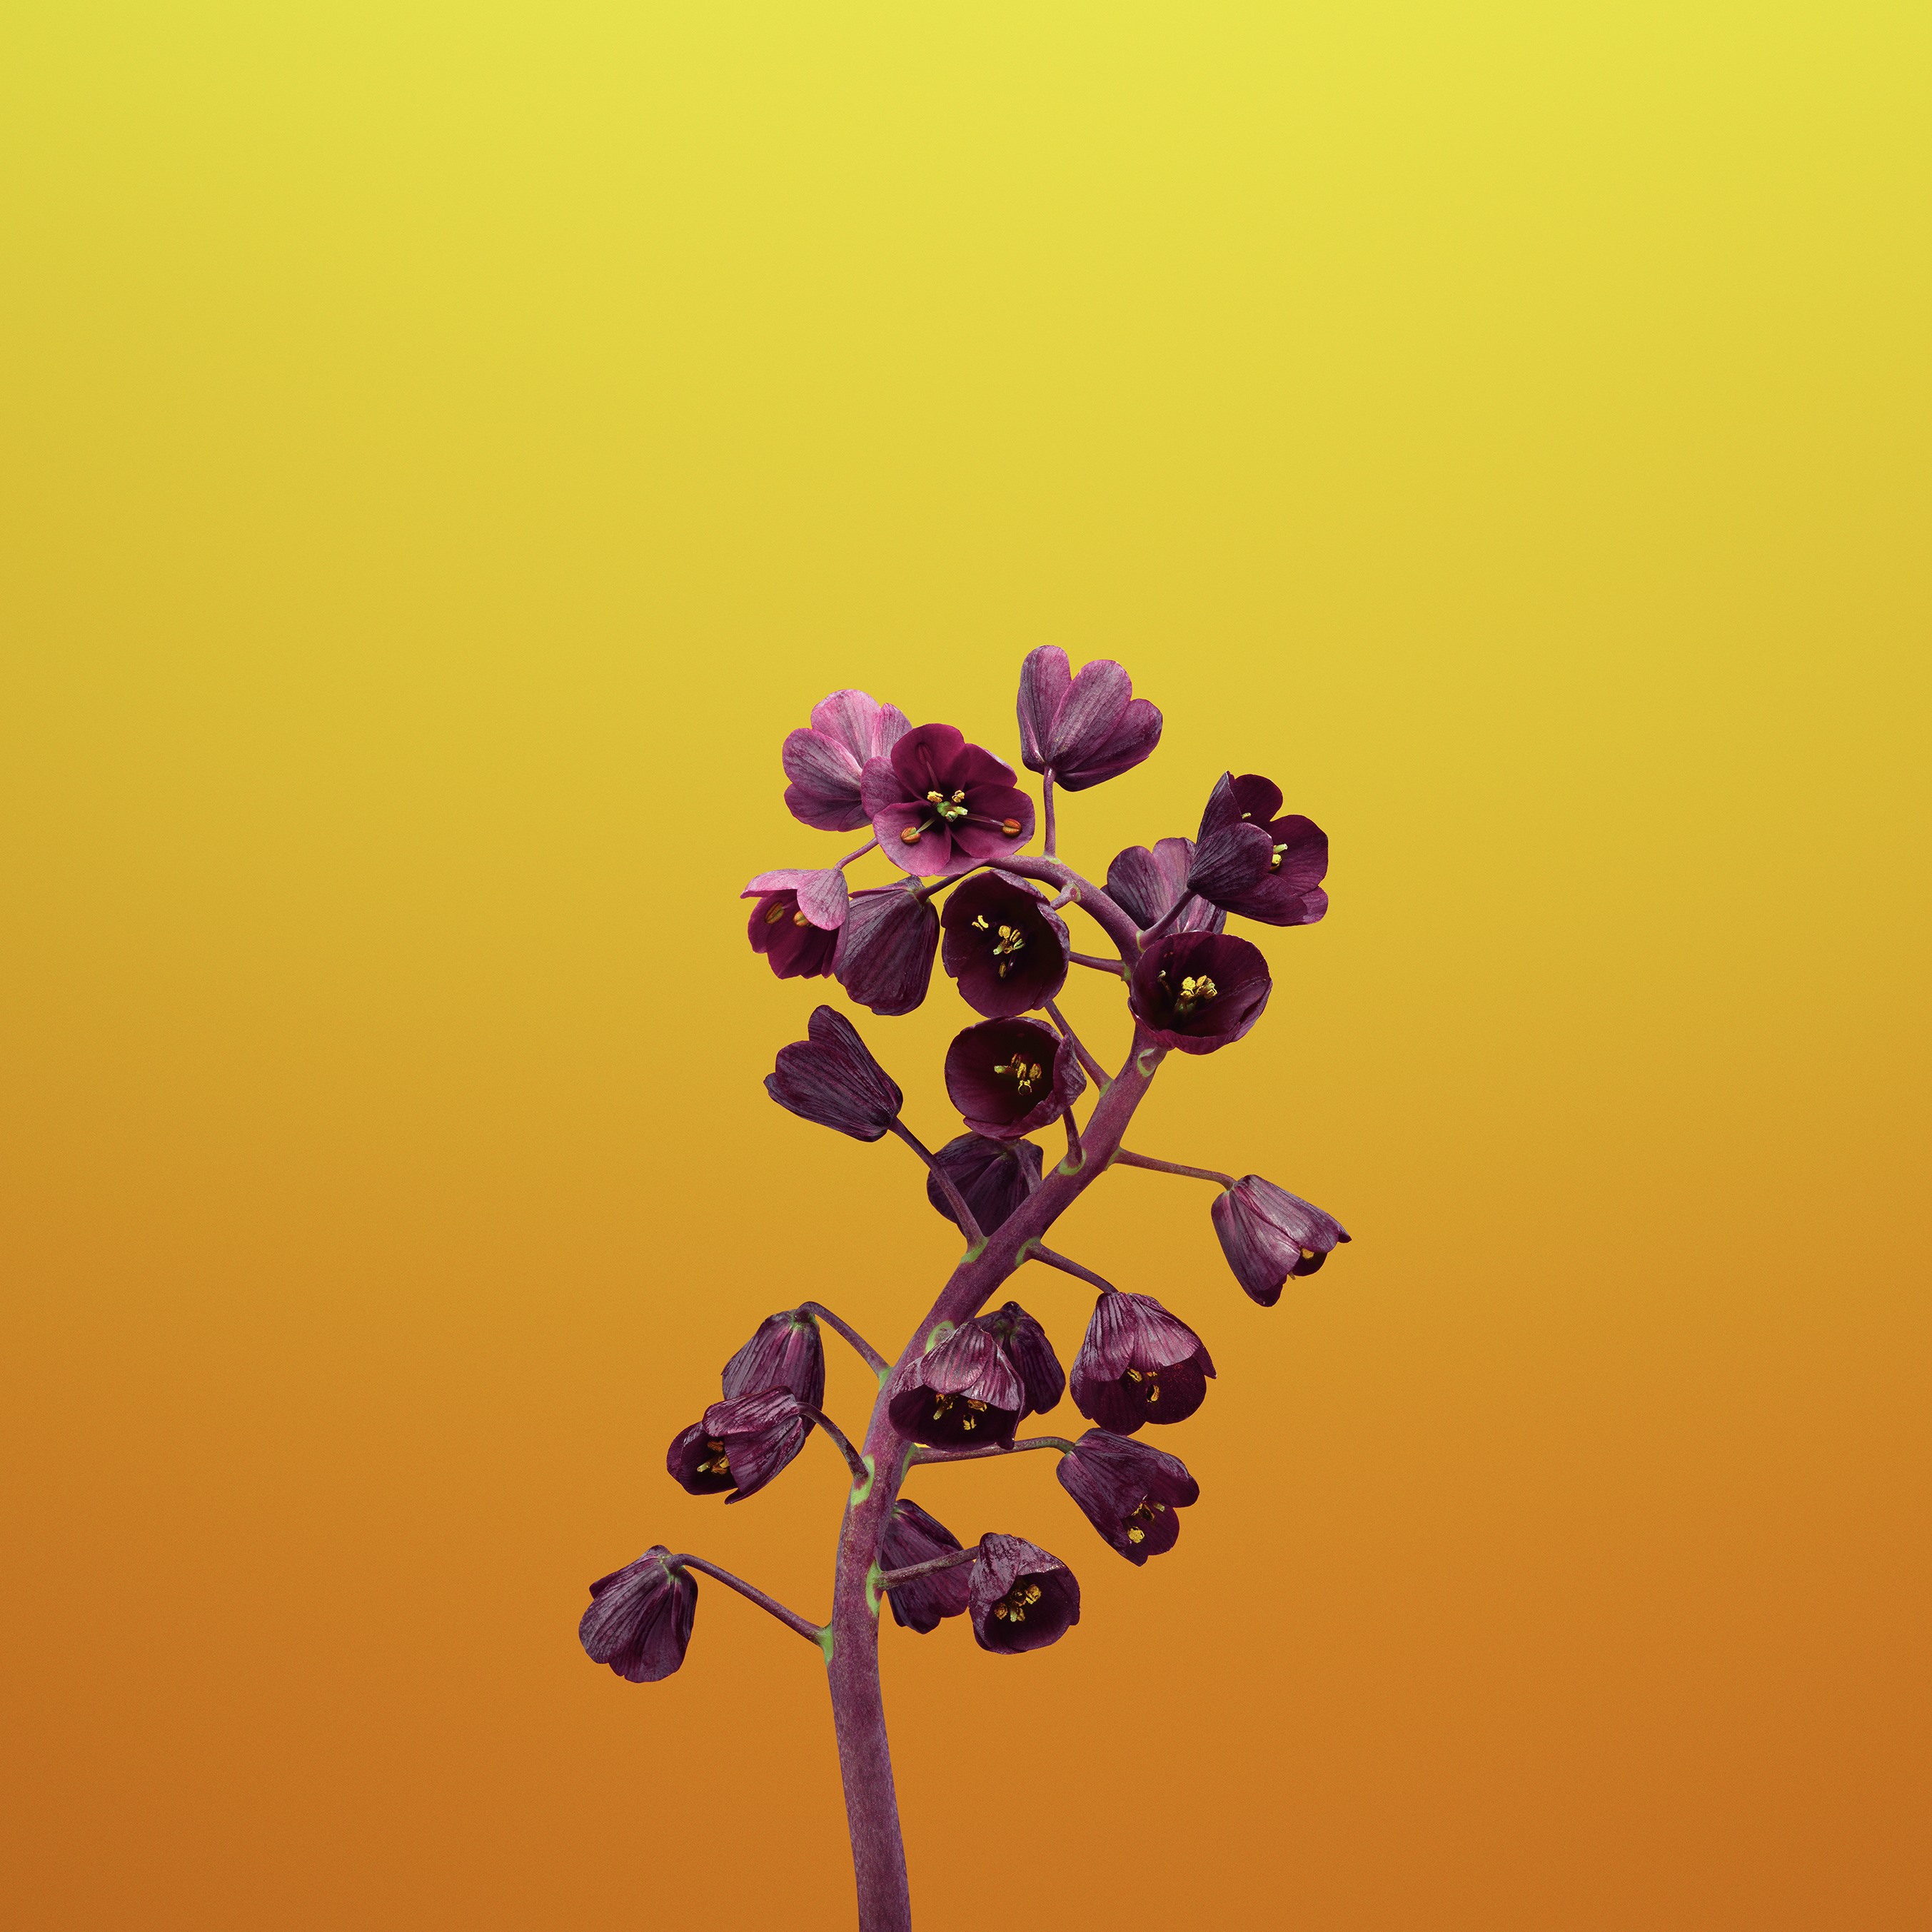 General 2706x2706 flowers simple background yellow background